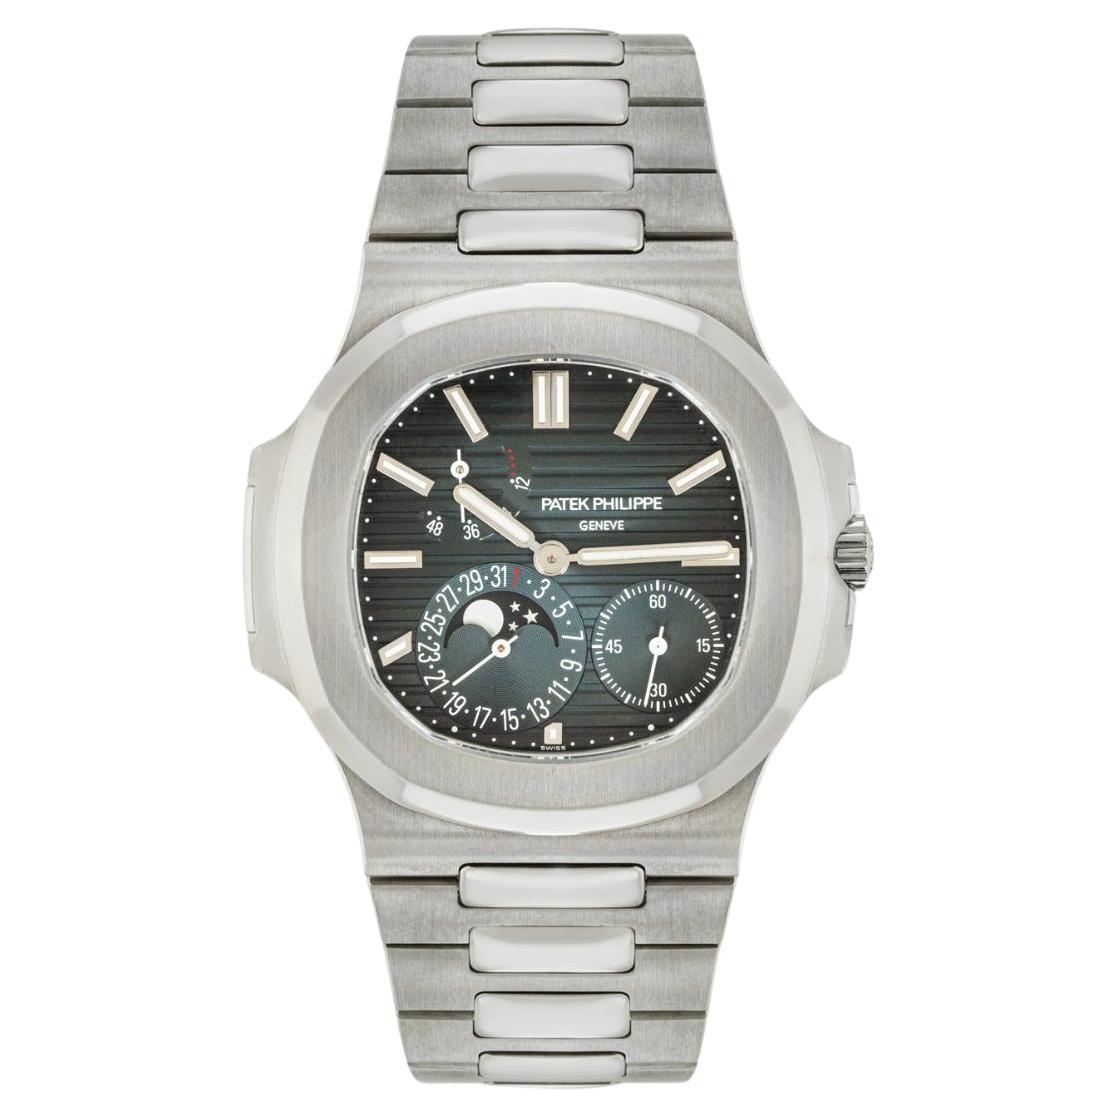 Does Patek Philippe make stainless steel watches?